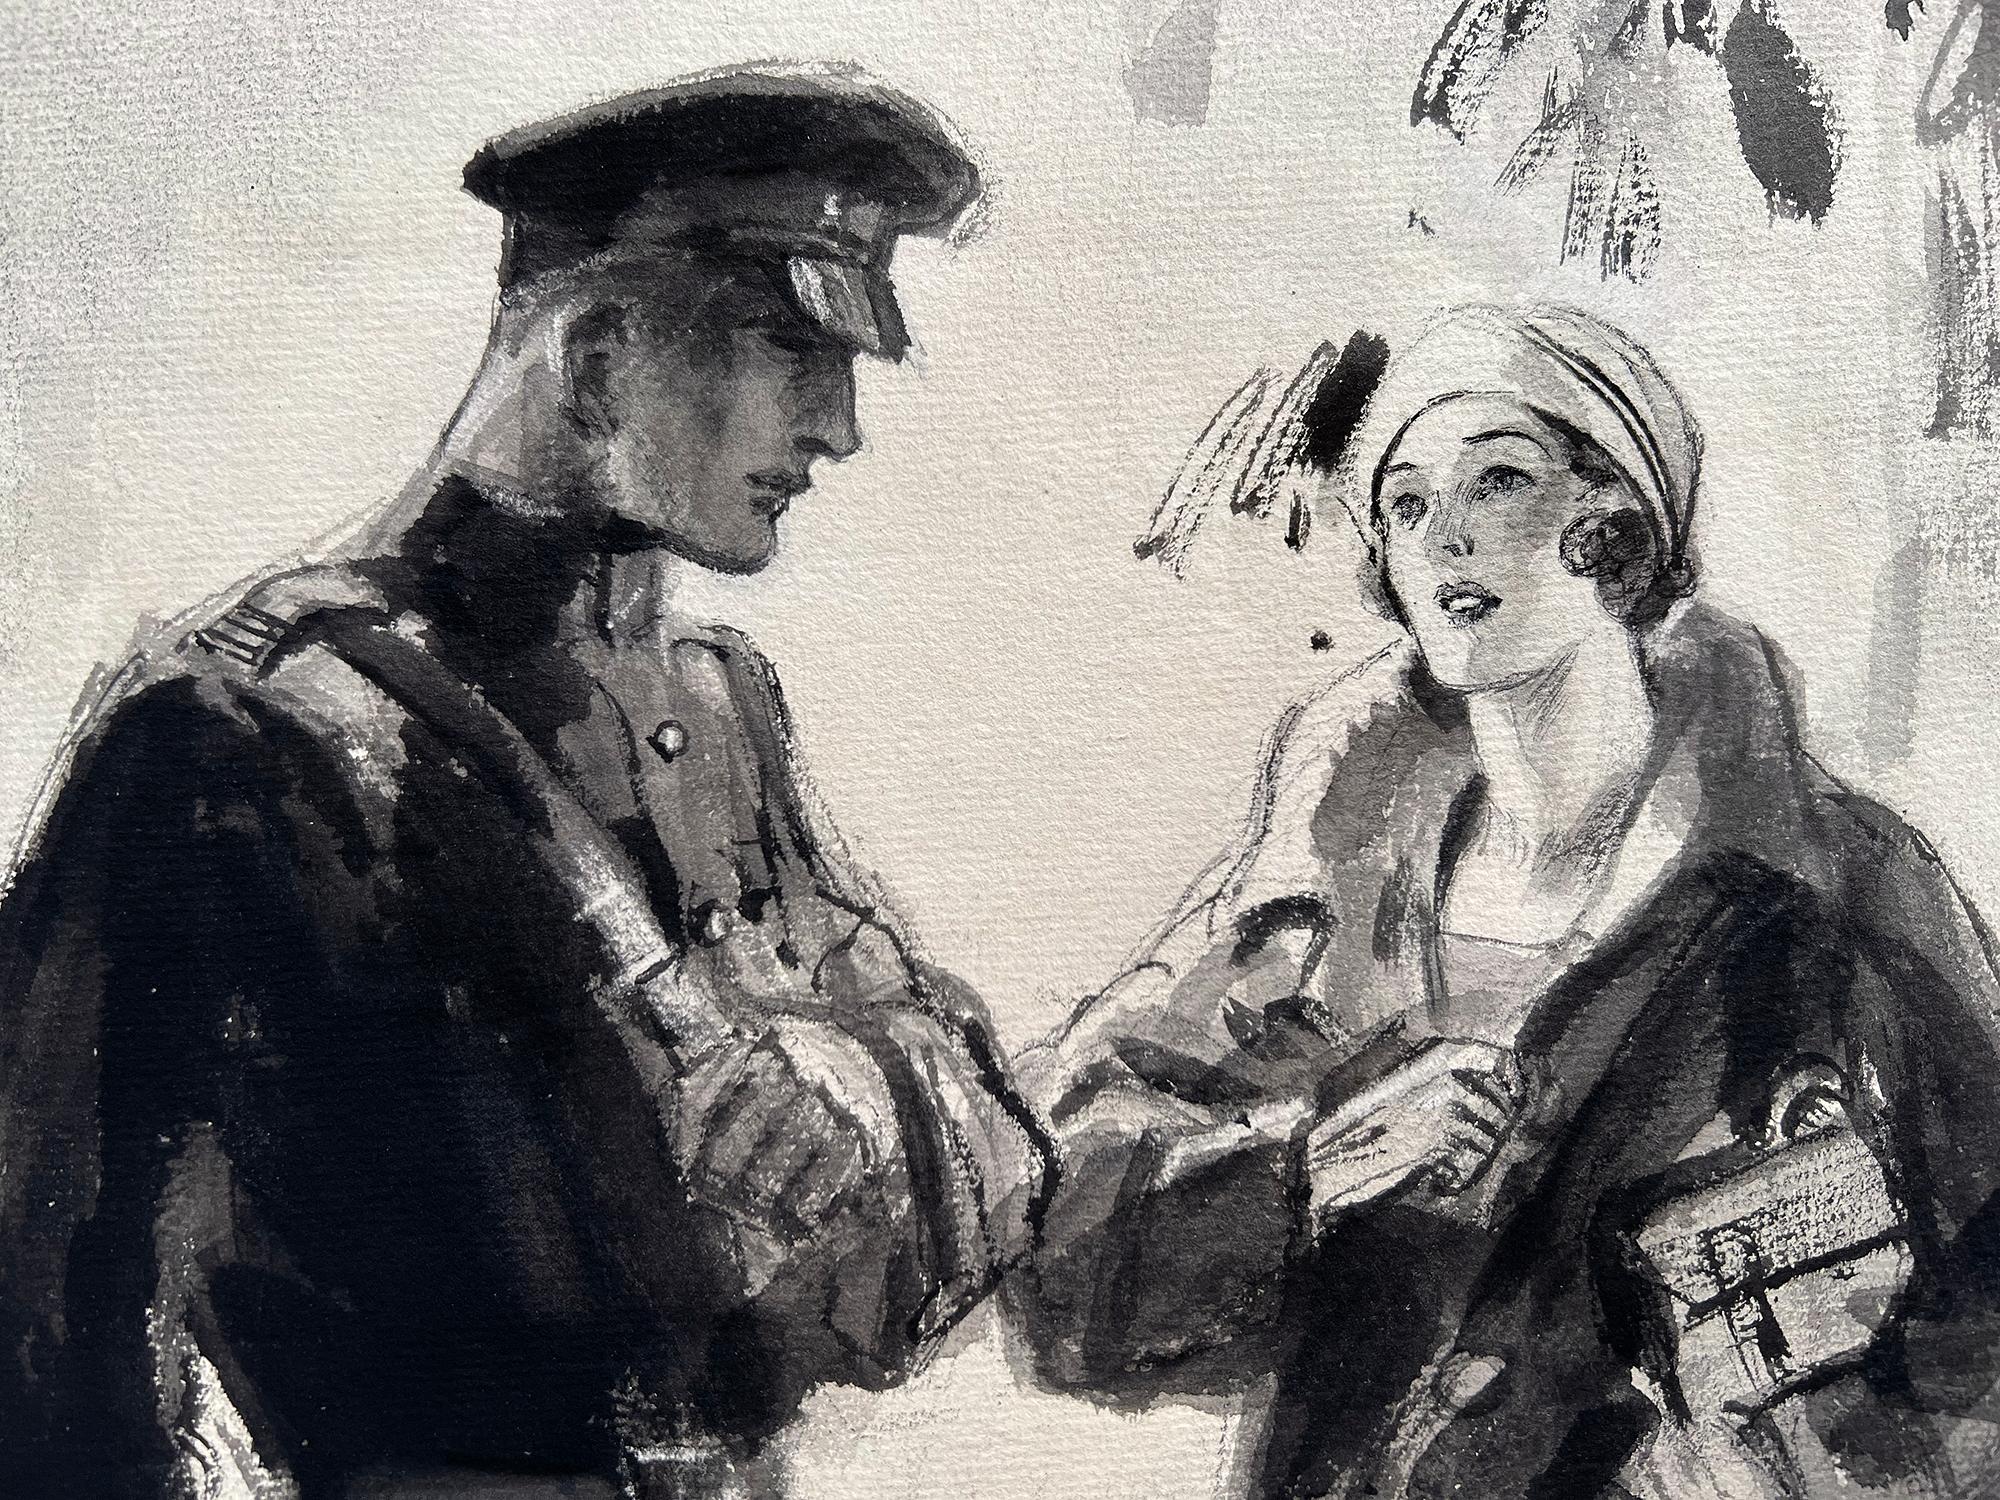 The technique and subject matter work well together in this loosely but masterfully rendered World War 1 romantic illustration of a Soldier and a Parisian woman.  Even though this work in about 100 years old it has a fresh quality to it. Wilmot